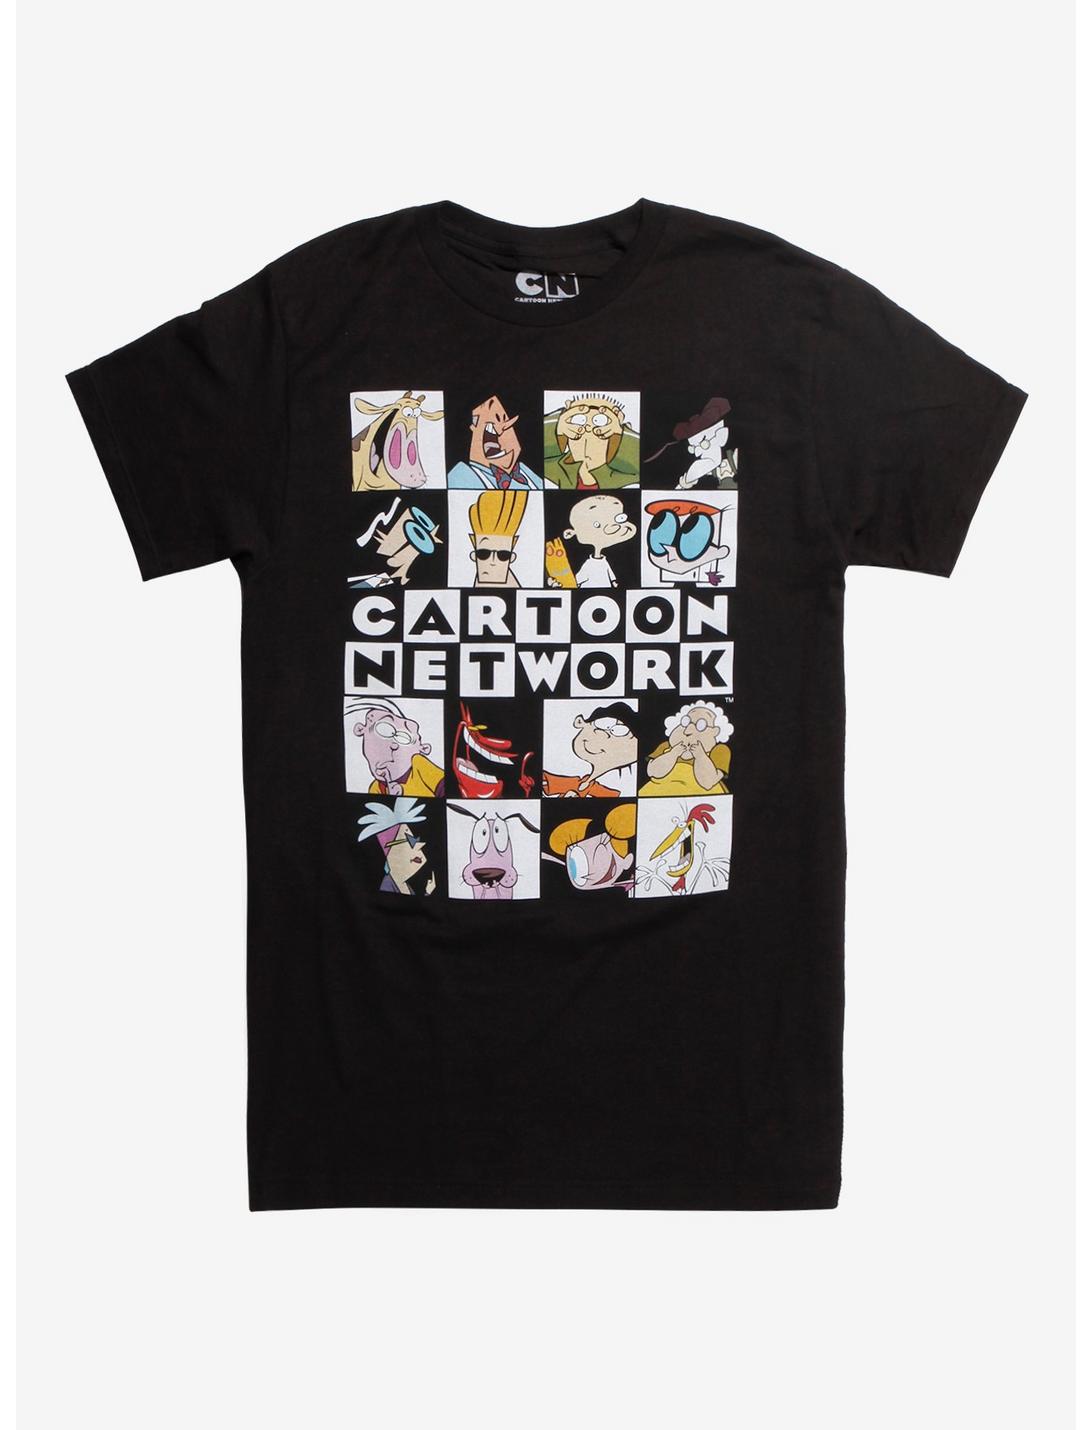 Cartoon Network Checkered Box Characters T-Shirt Hot Topic Exclusive | Hot  Topic